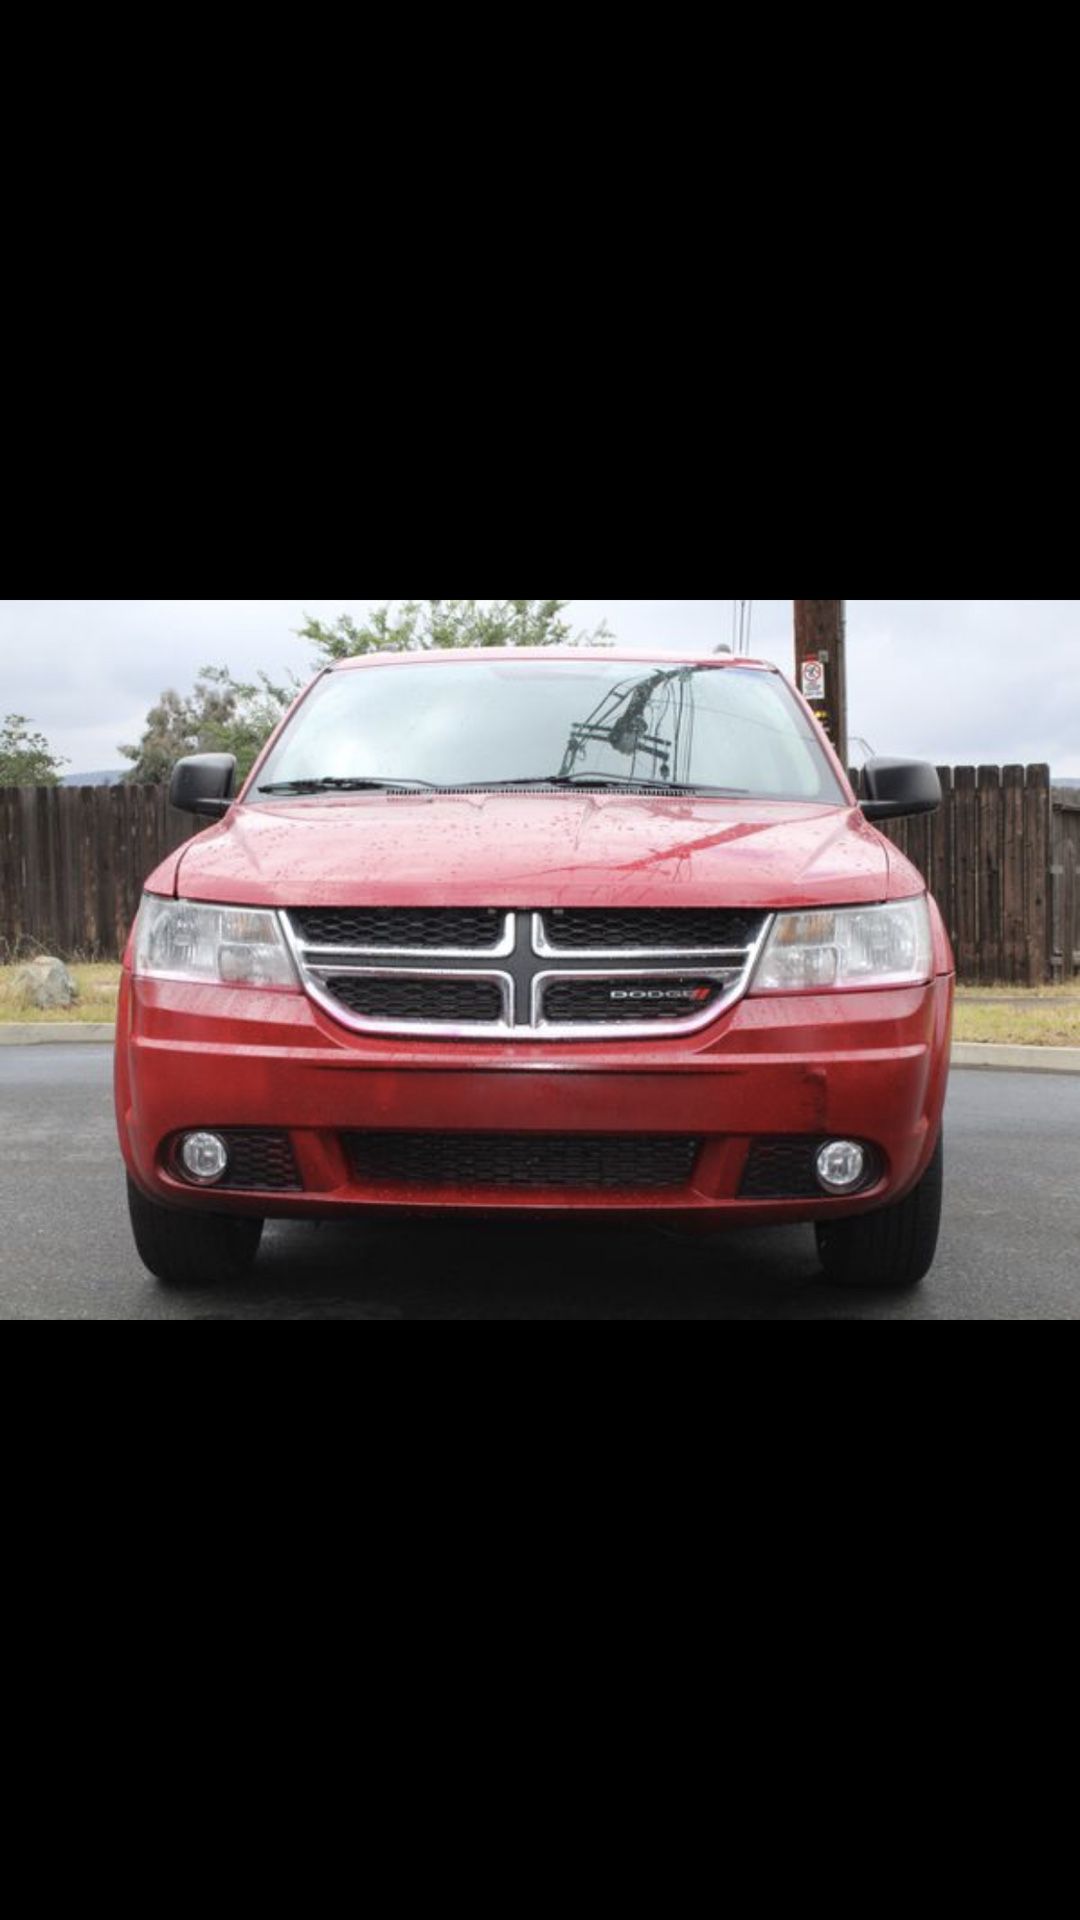 -2015 Dodge Journey Se 50k miles -Registration up to date with salvage Title on Hand -Beautiful interior -Nice Hot red exterior